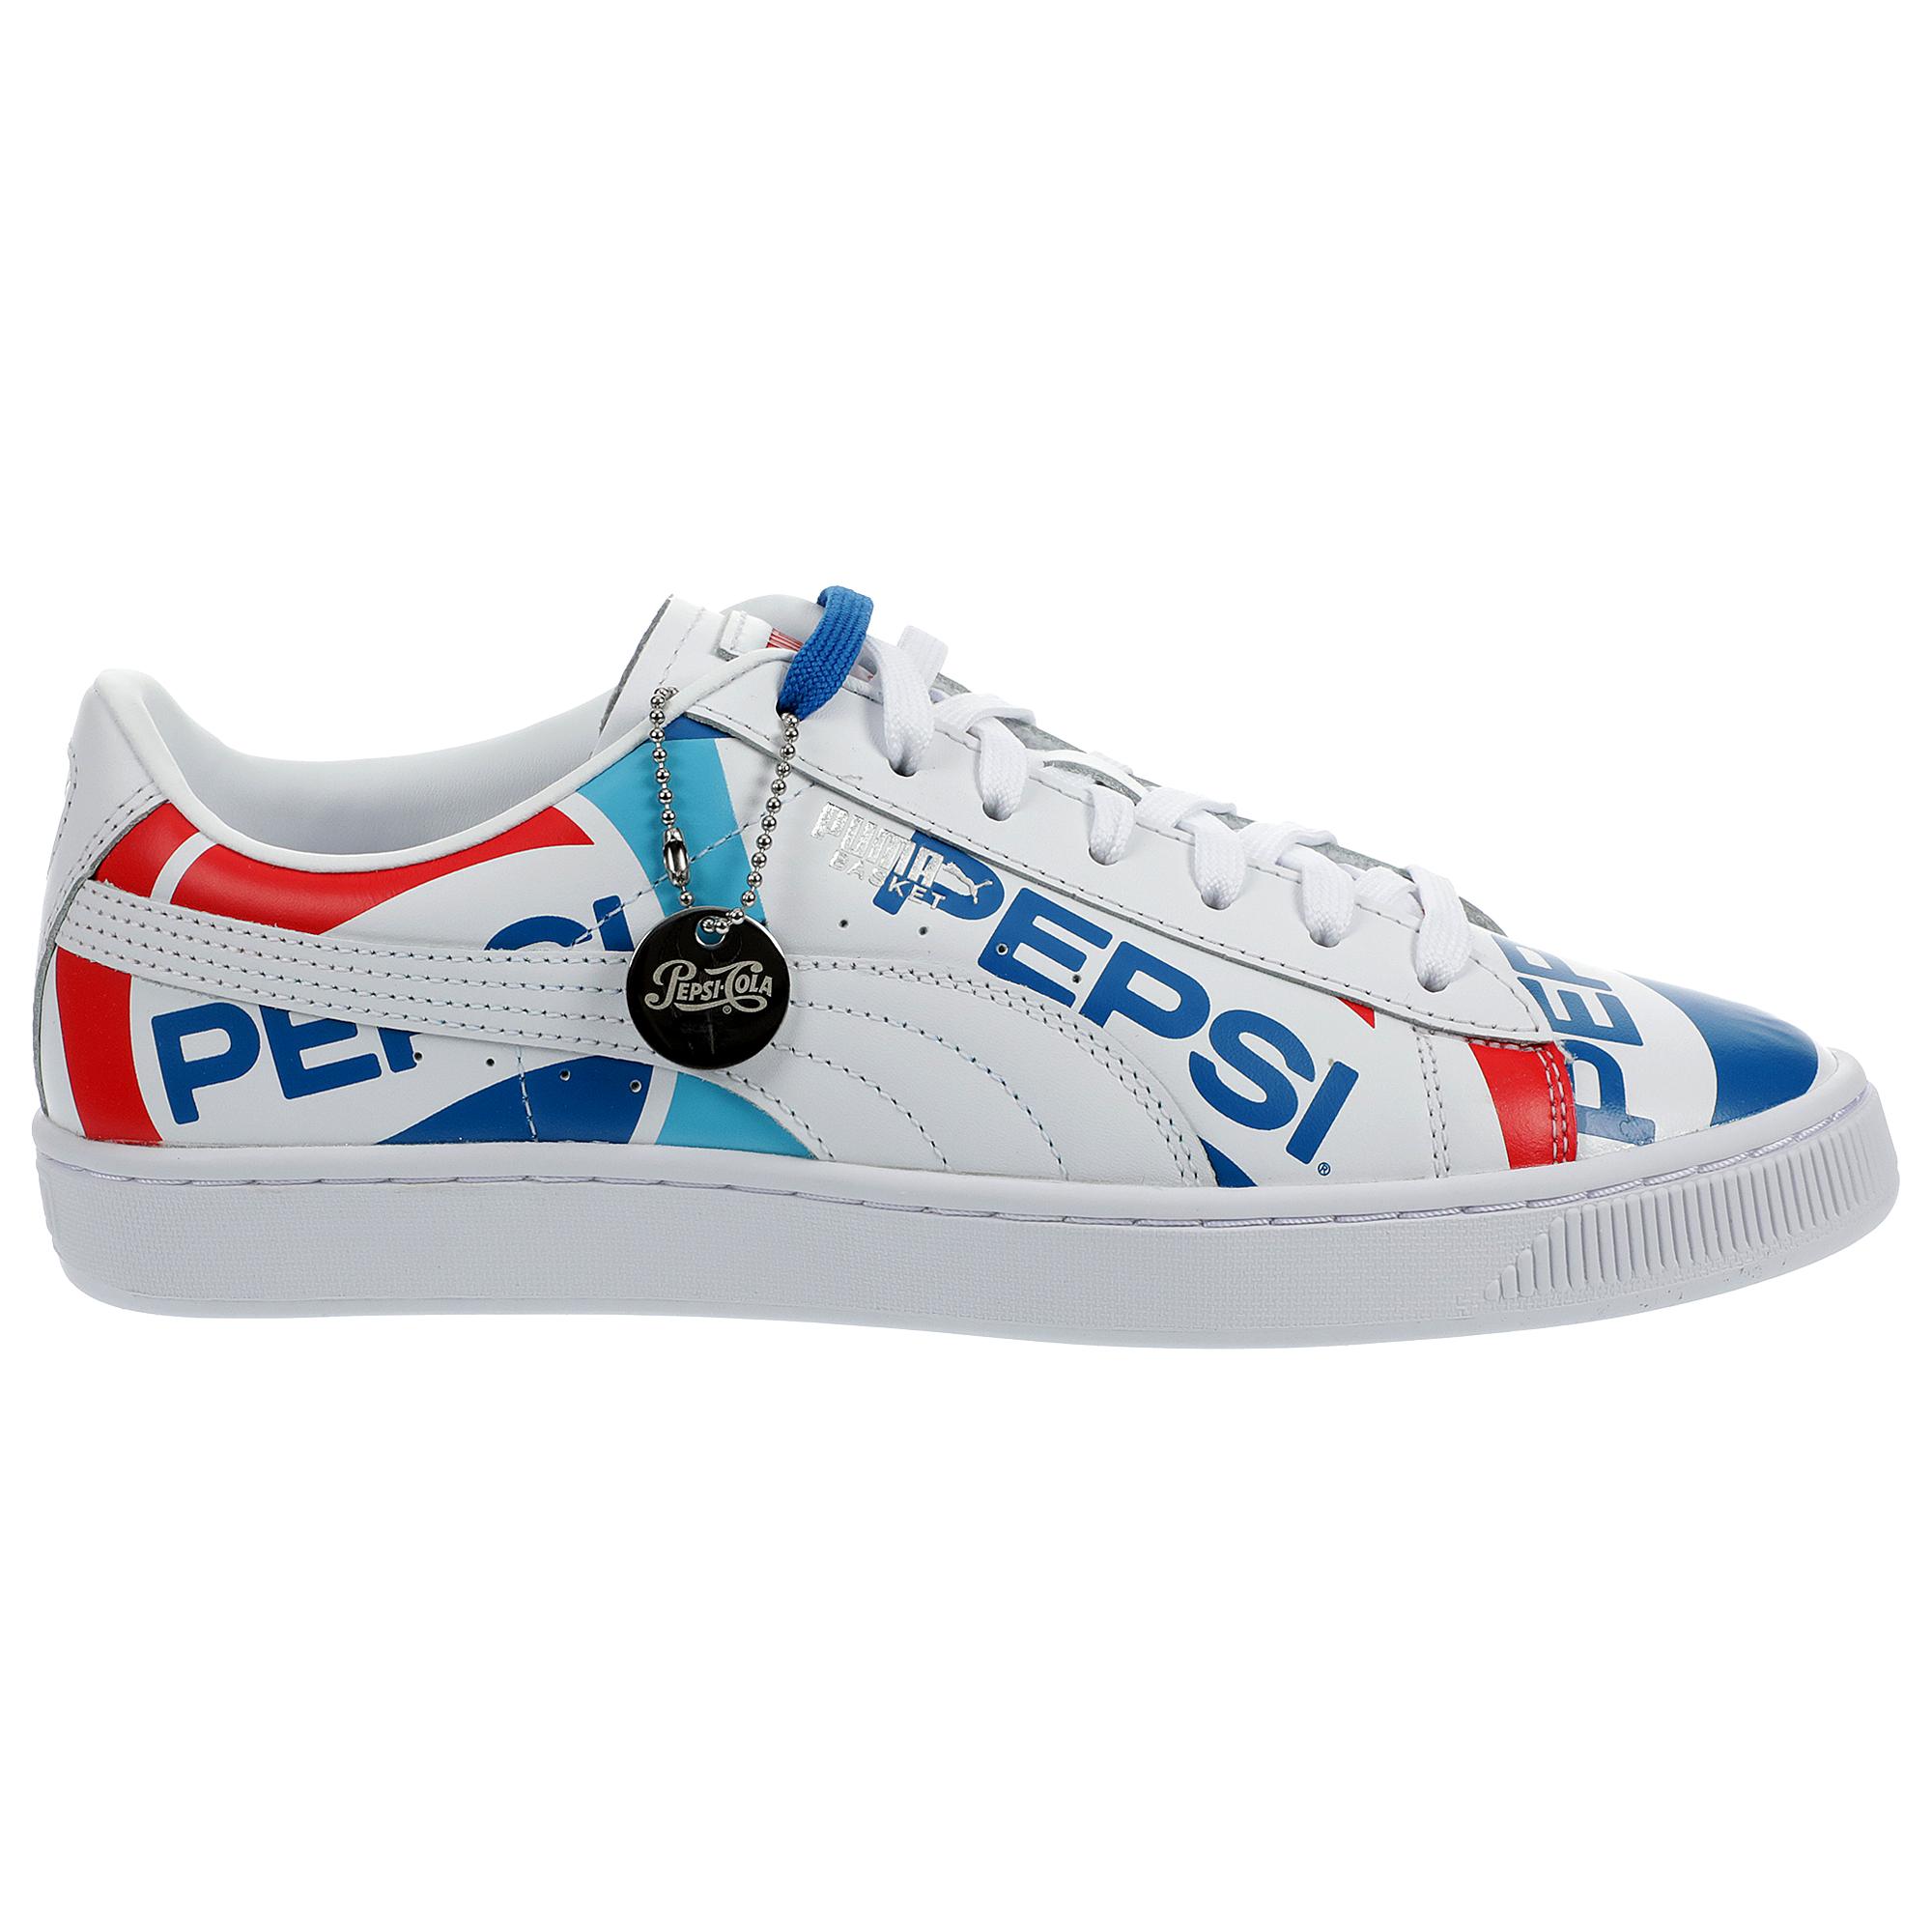 PUMA Leather Basket X Pepsi in White/Blue (Blue) for Men - Lyst